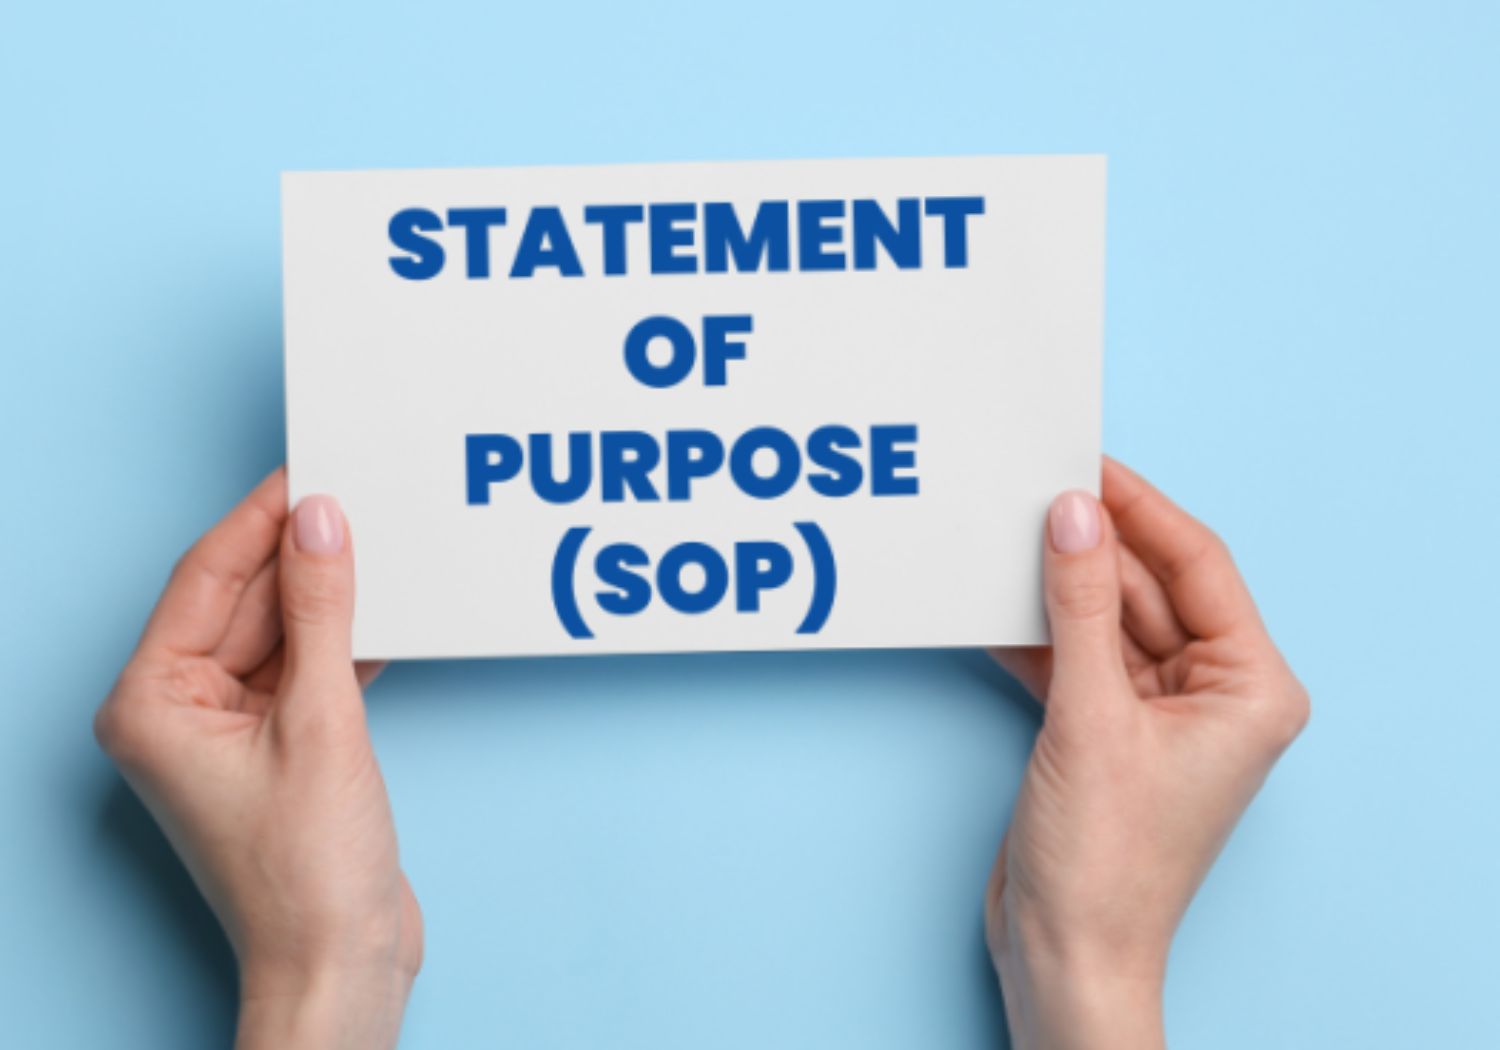 2. Everything You Need to Know About Statement of Purpose